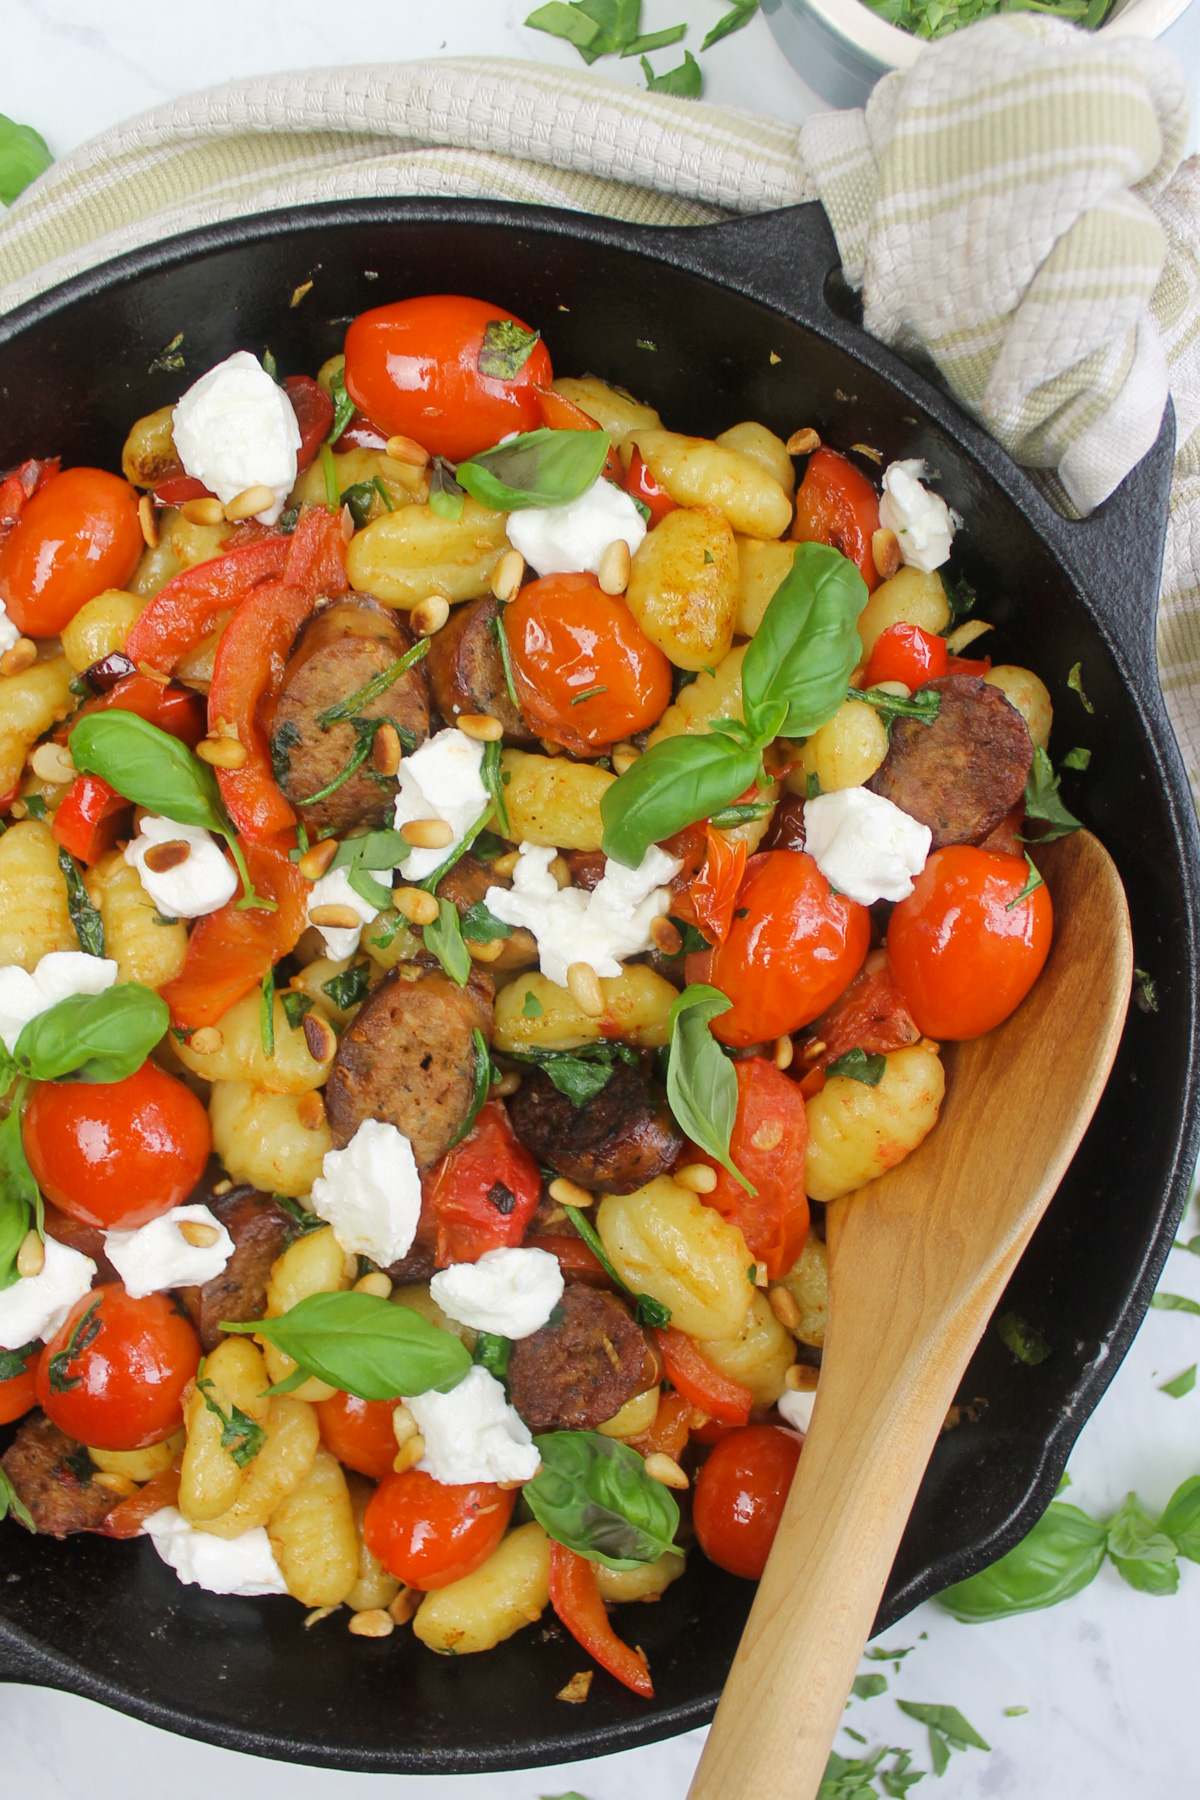 Pan fried gnocchi with spinach, tomato, peppers and Italian sausage links with a wooden spoon.